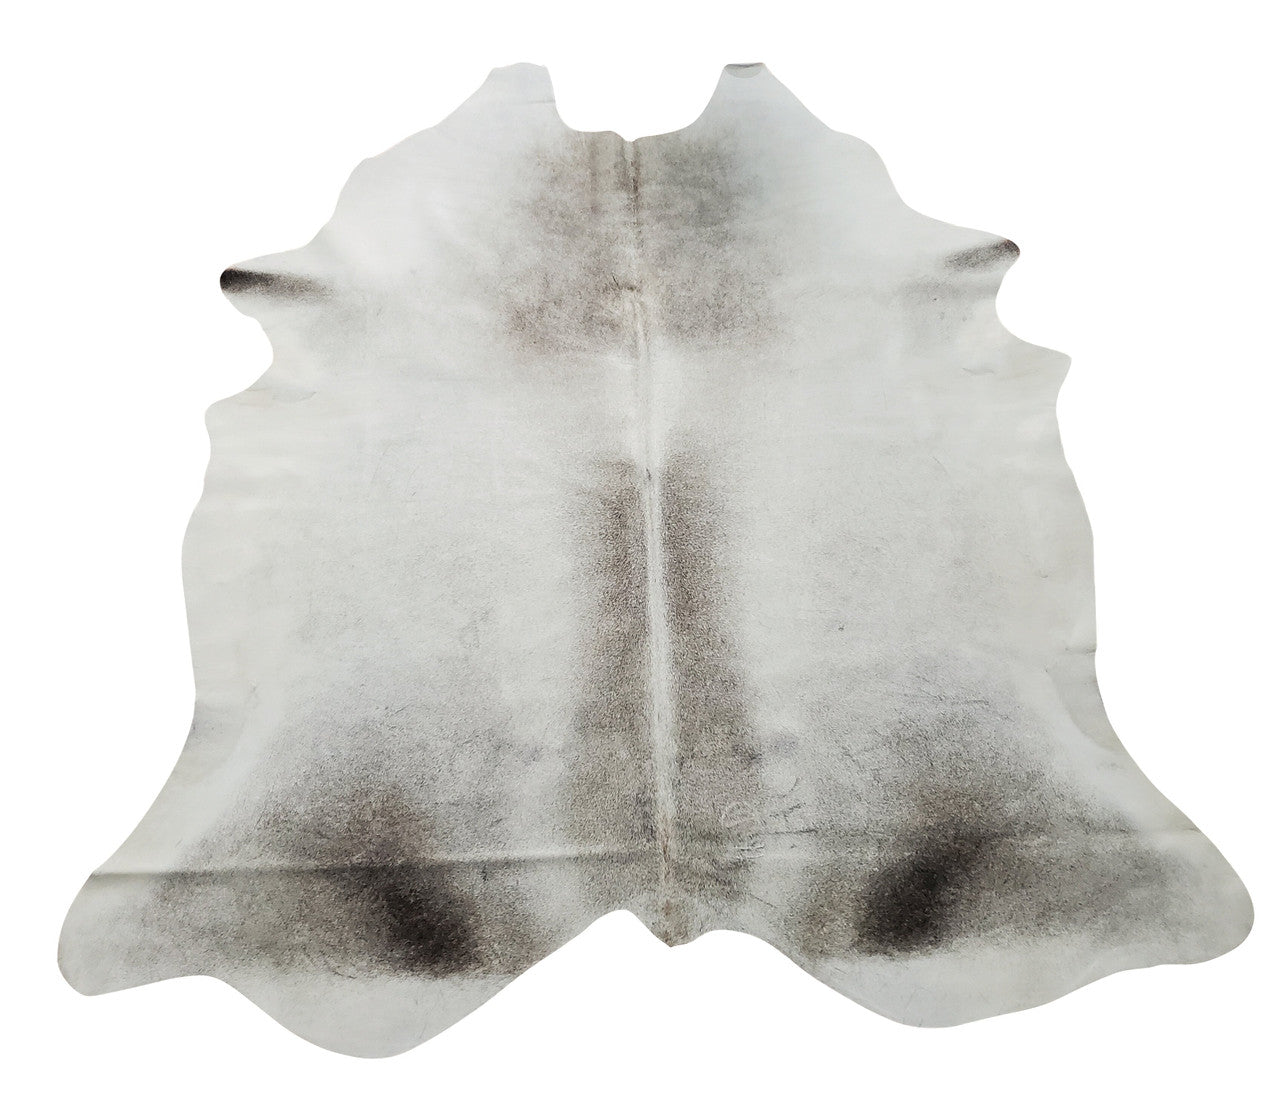 A light brindle cowhide rug that will look great in any space like home office or living room, perfect soft grey colors.